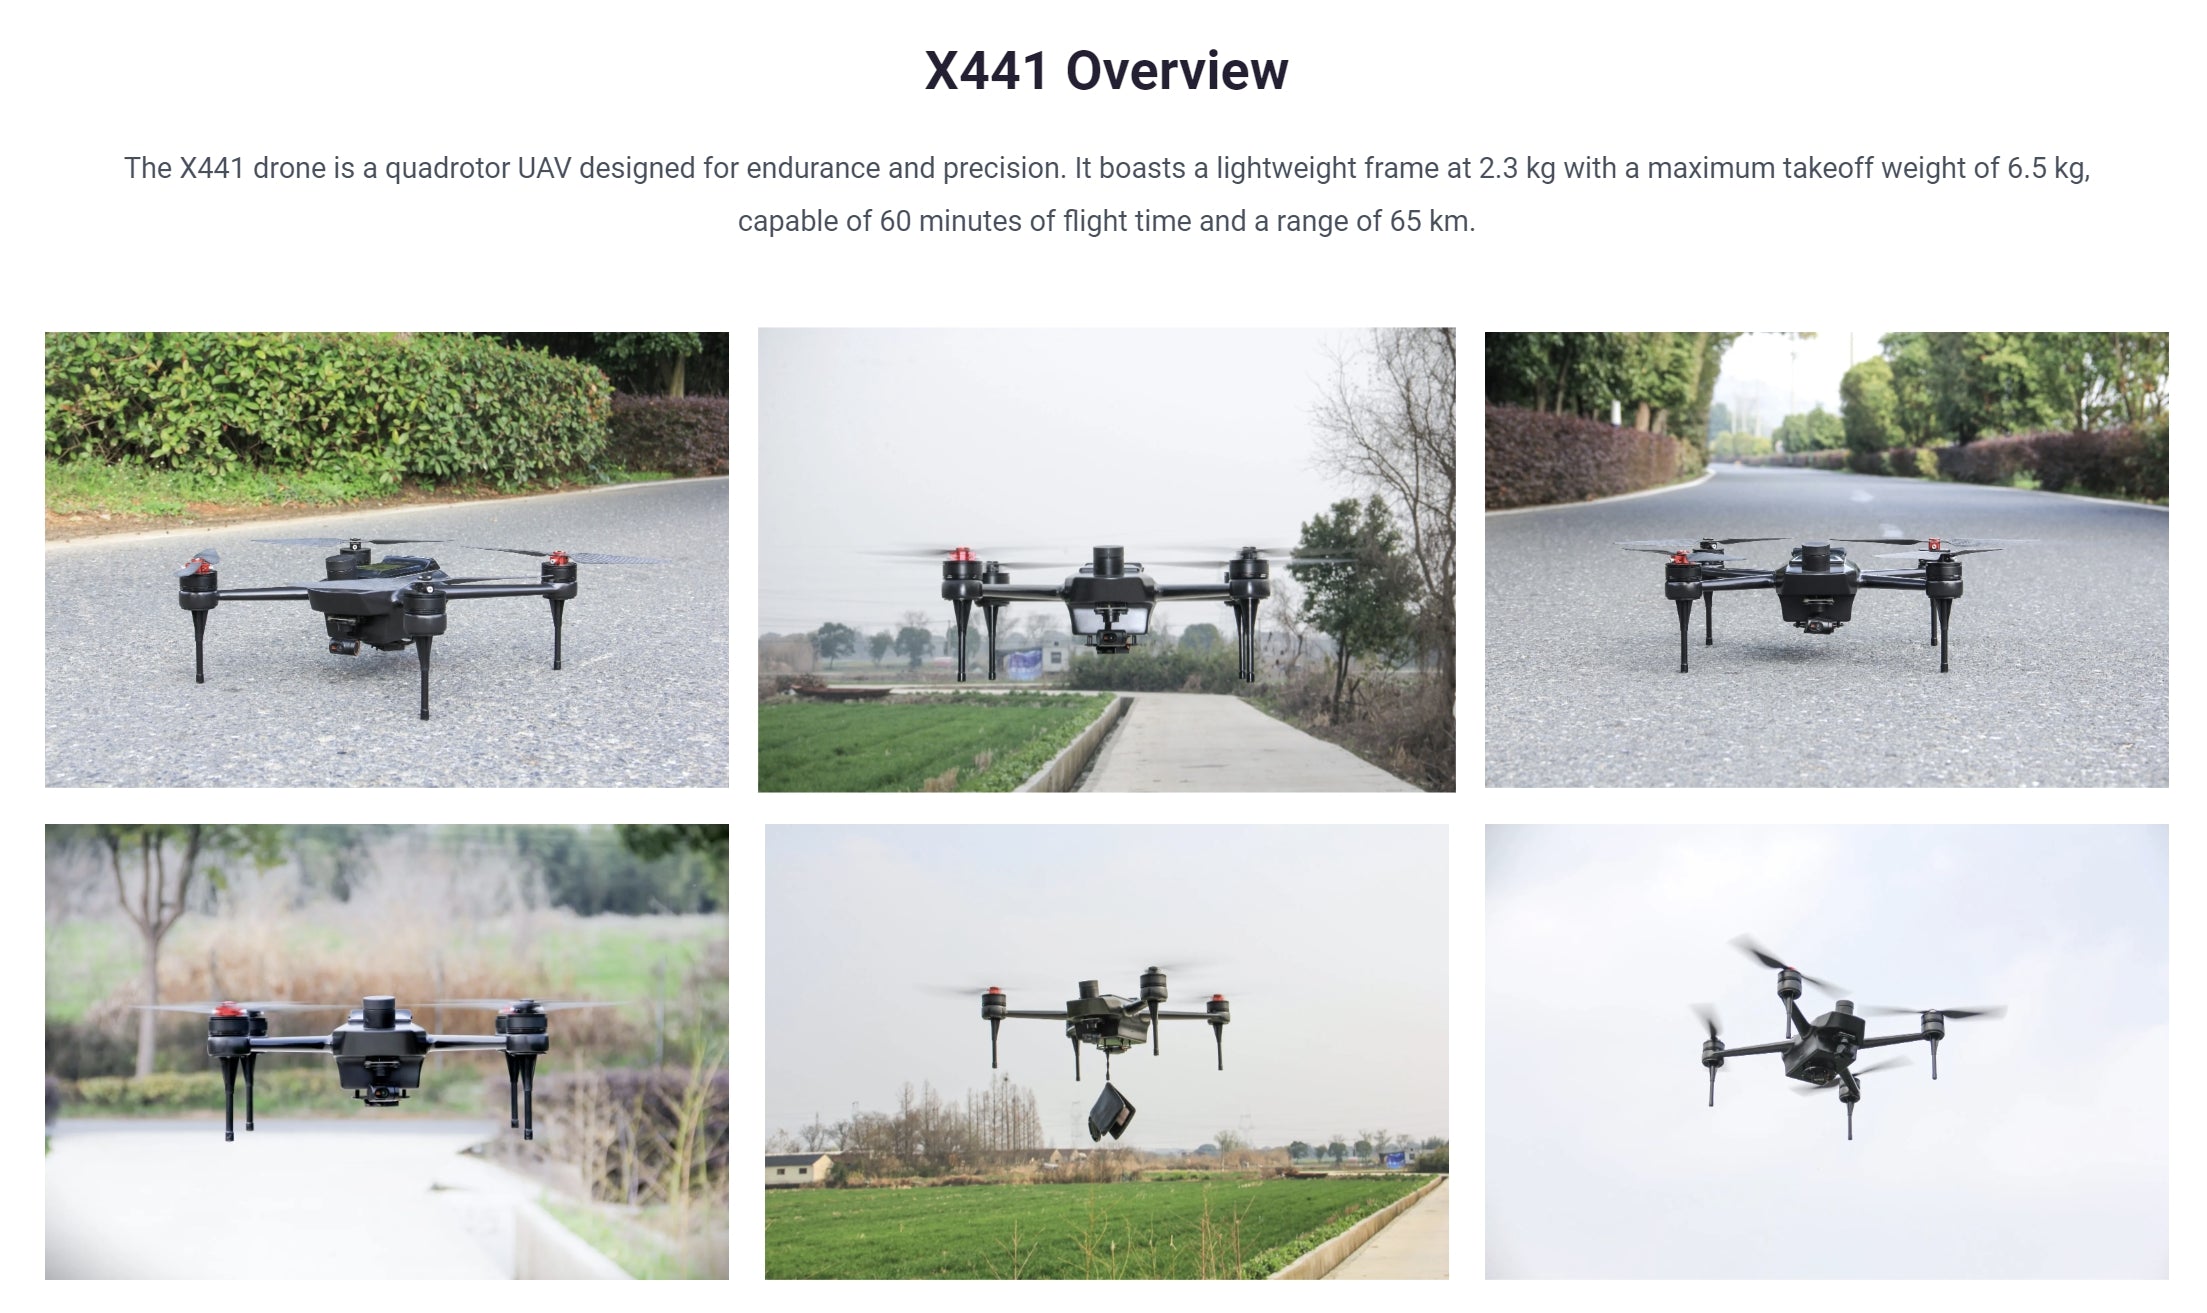 X441 Long Range Drone, X441 drone boasts a lightweight frame at 2.3 kg with a maximum